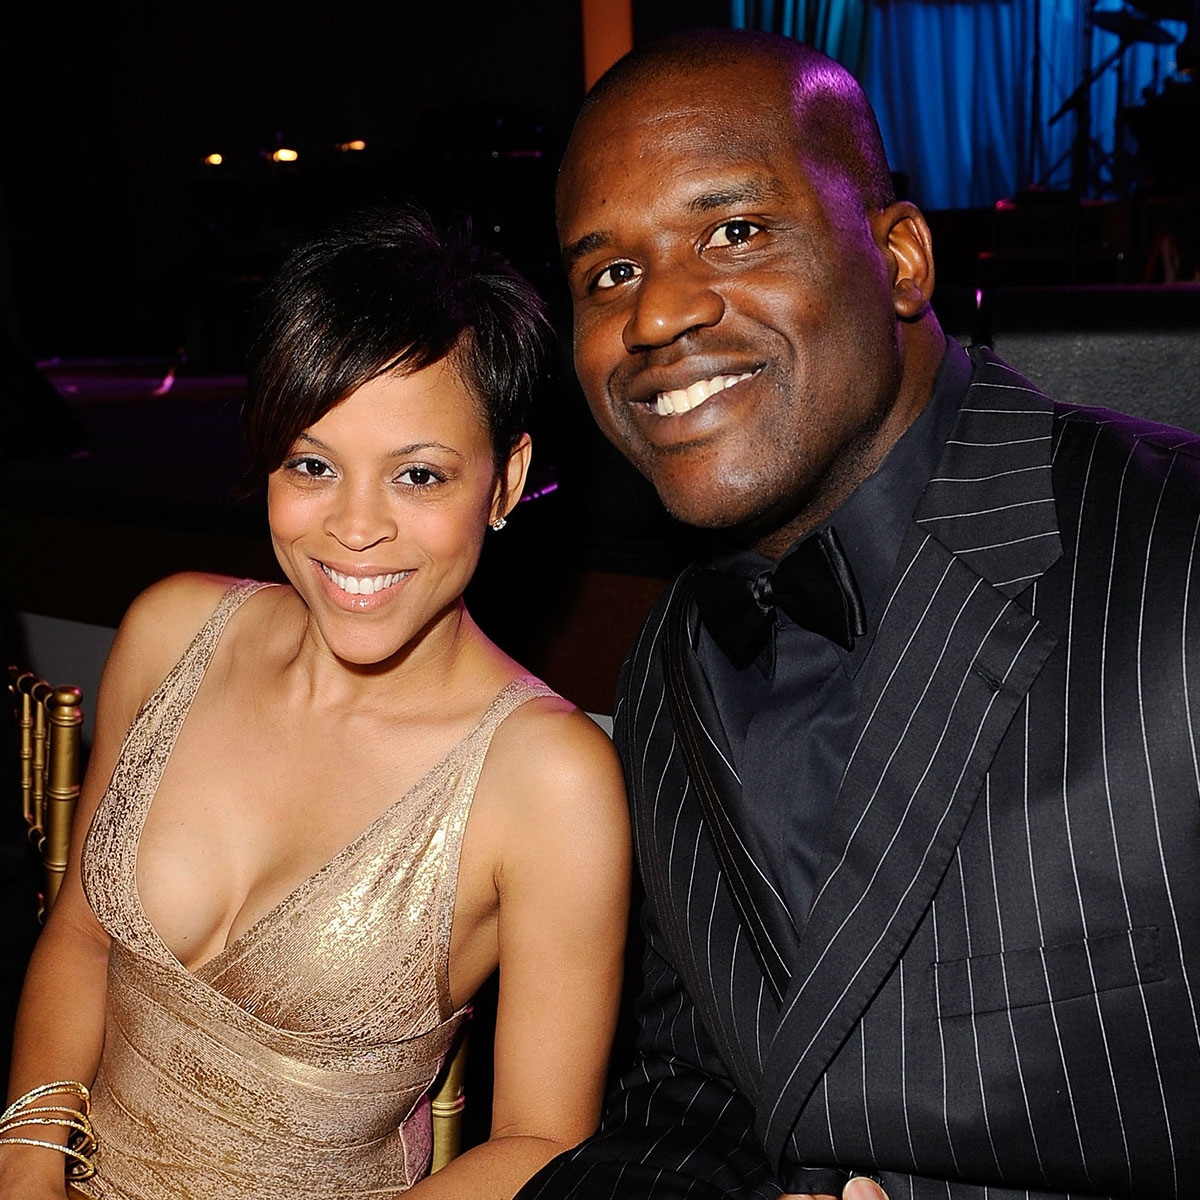 Who Is Shaquille O'Neal Dating? Complete Relationship Info!